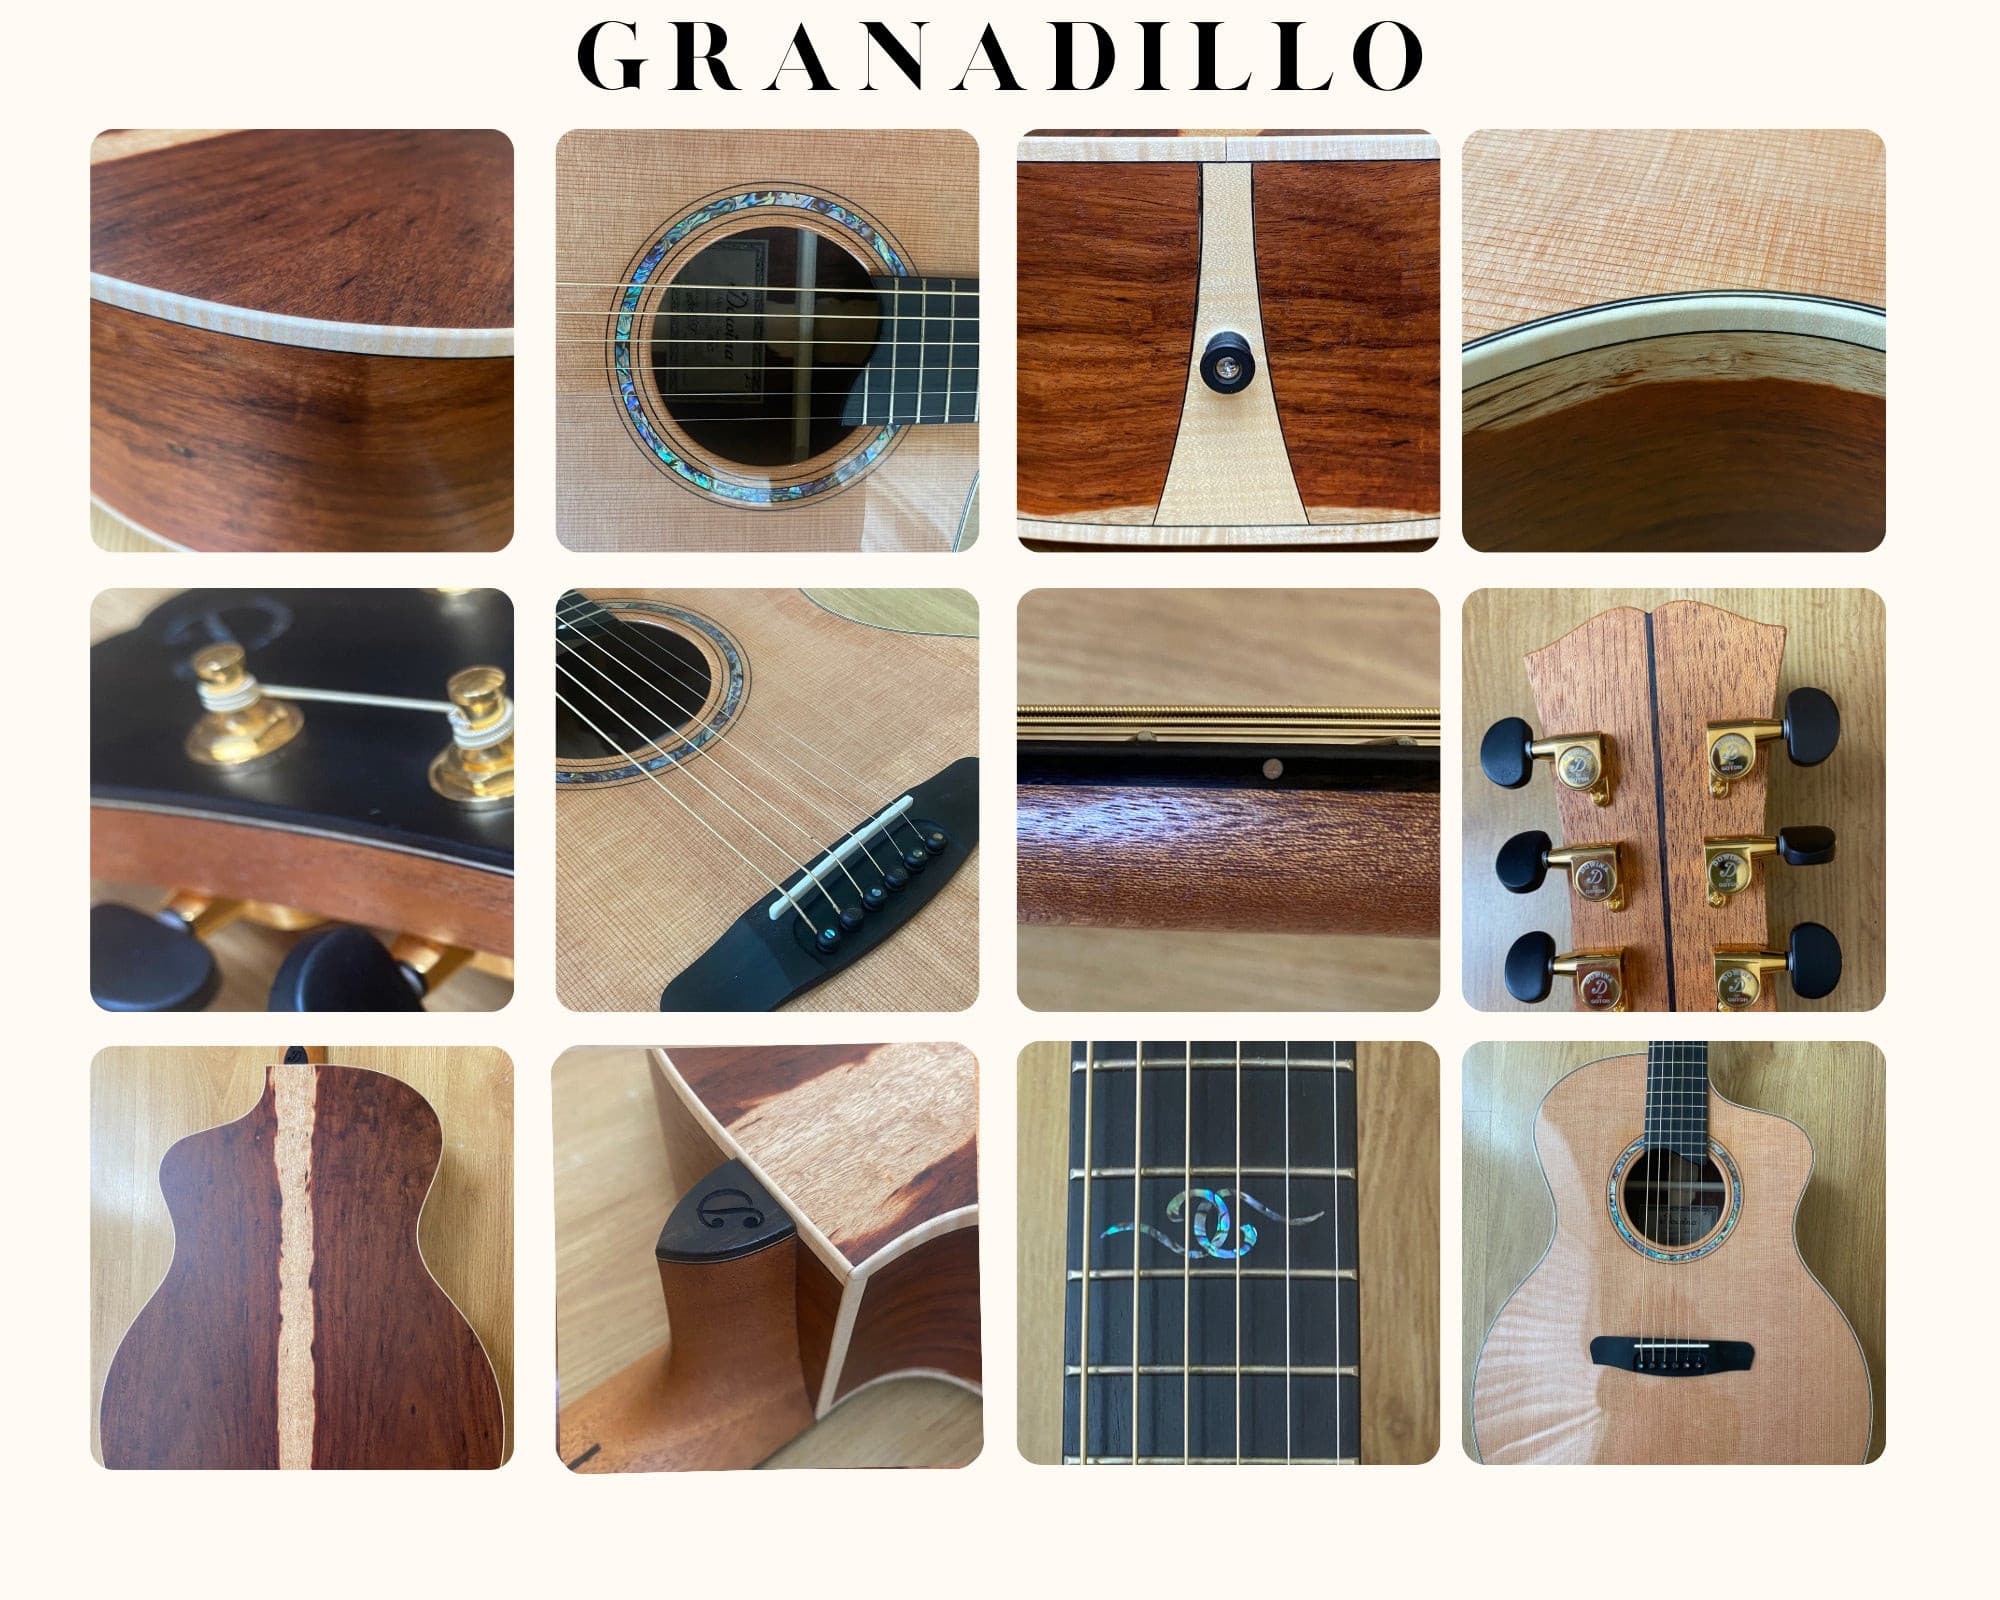 Dowina Granadillo Inspired GAC DS Limited Edition, Acoustic Guitar for sale at Richards Guitars.